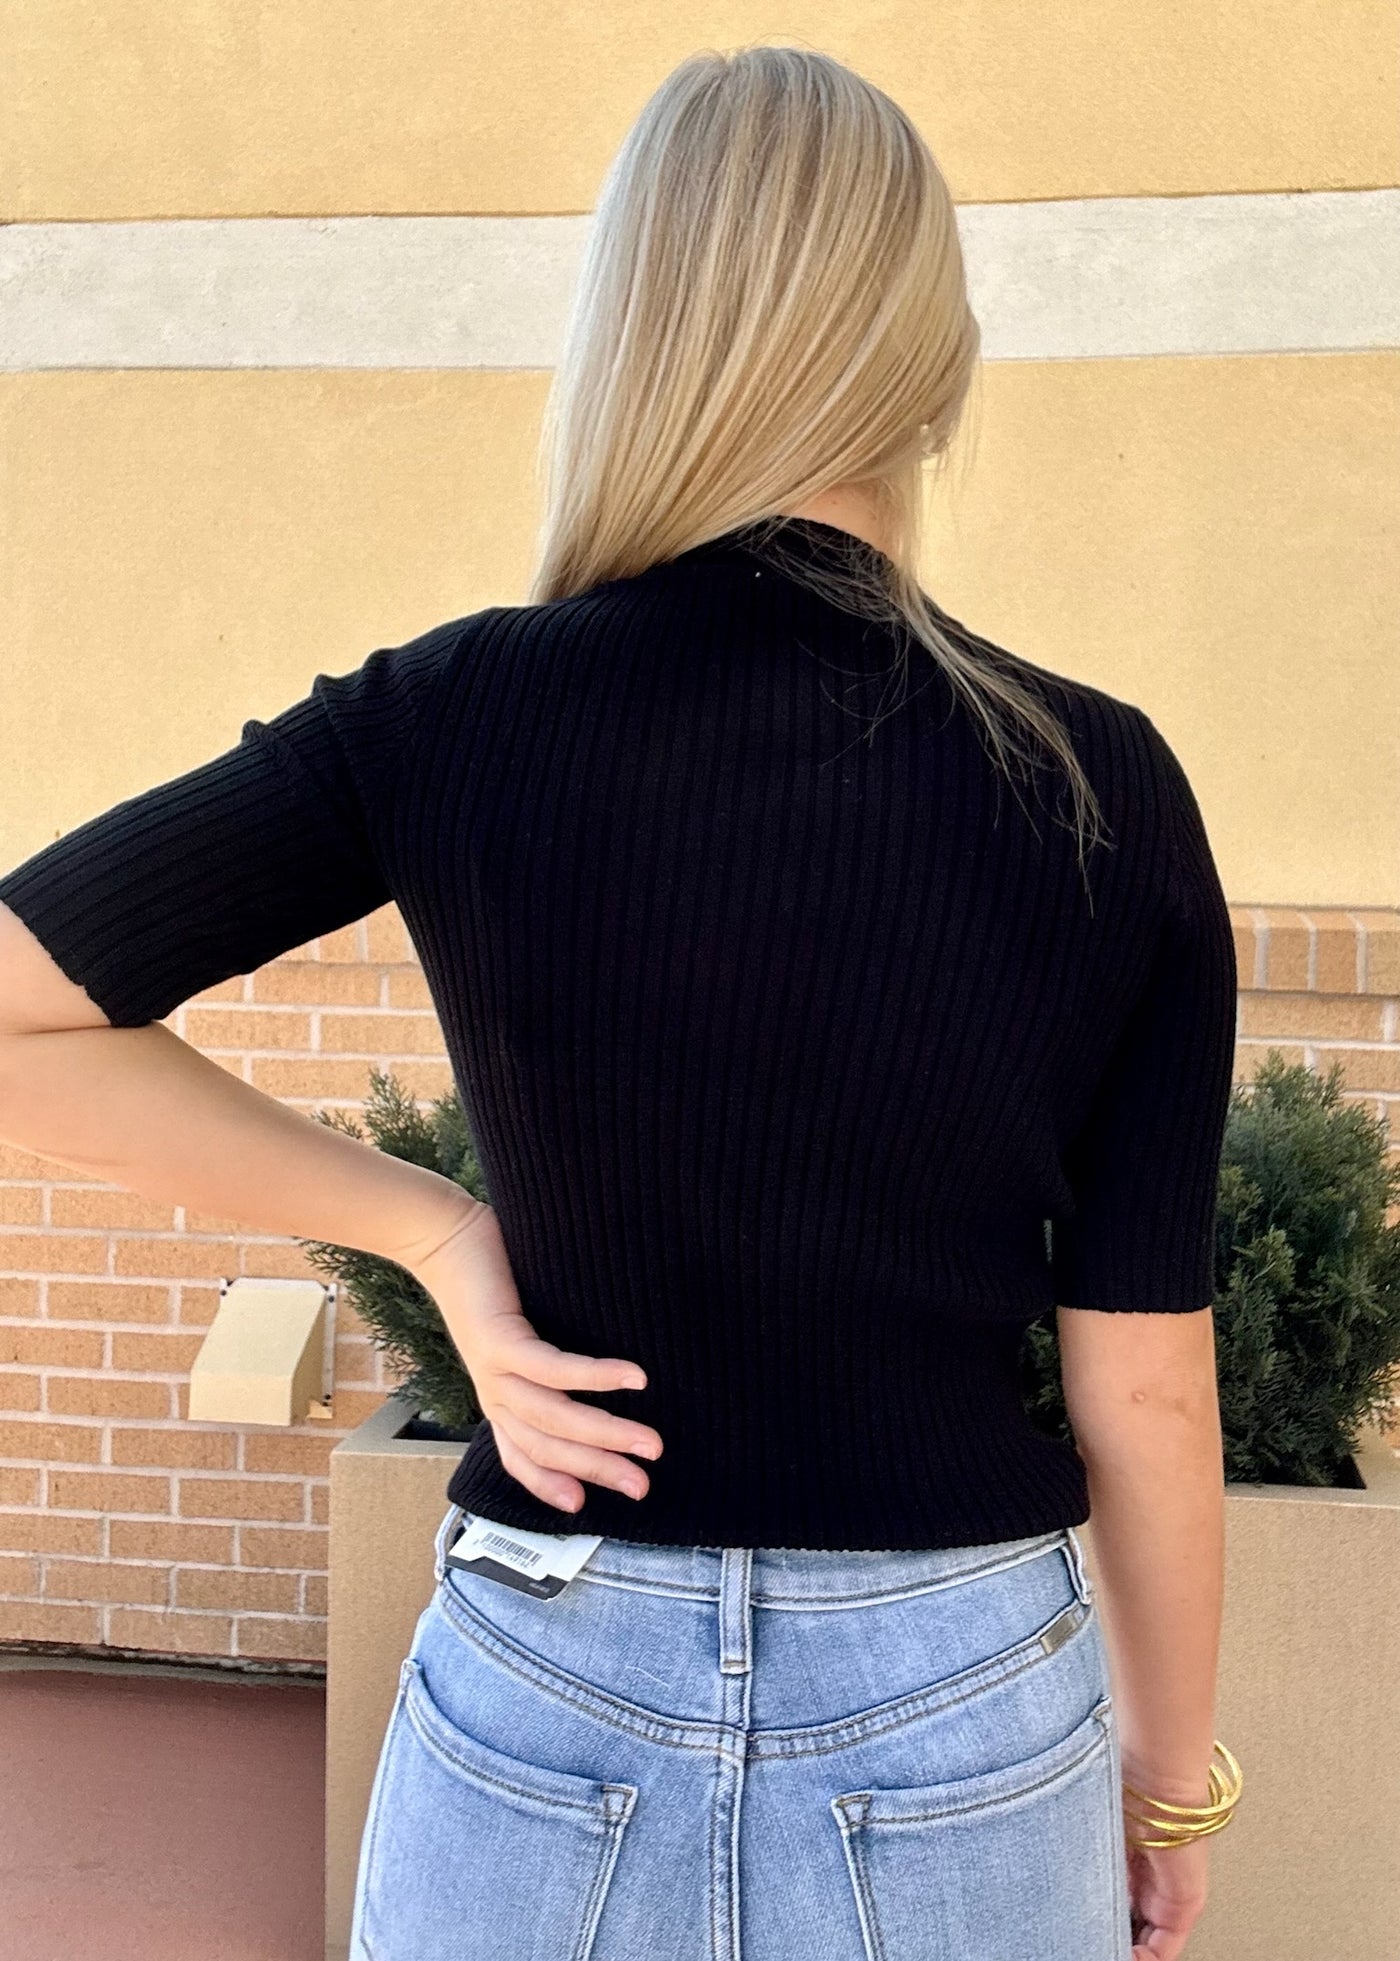 BACK VIEW OF AVA IN TOP